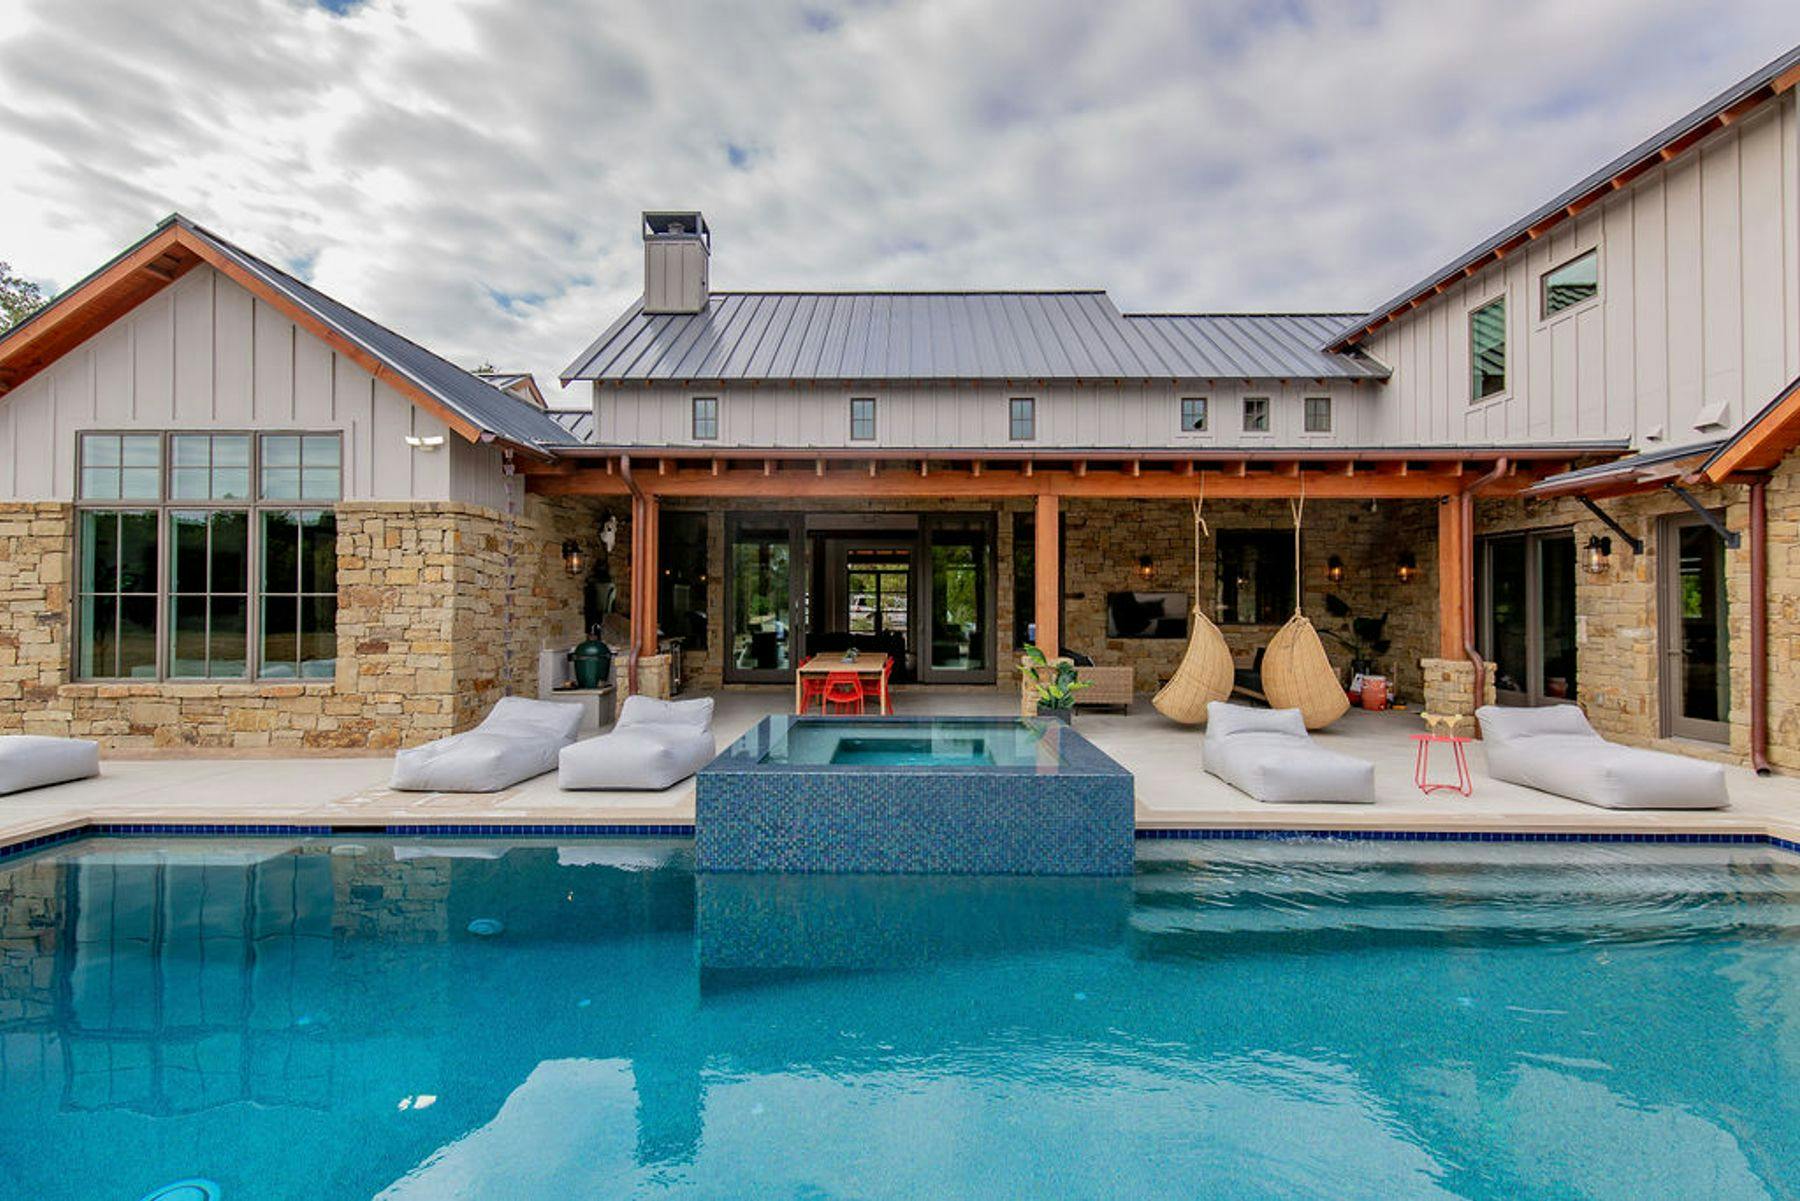 Outdoor oasis with pool and lounge furniture at Austin vacation rental